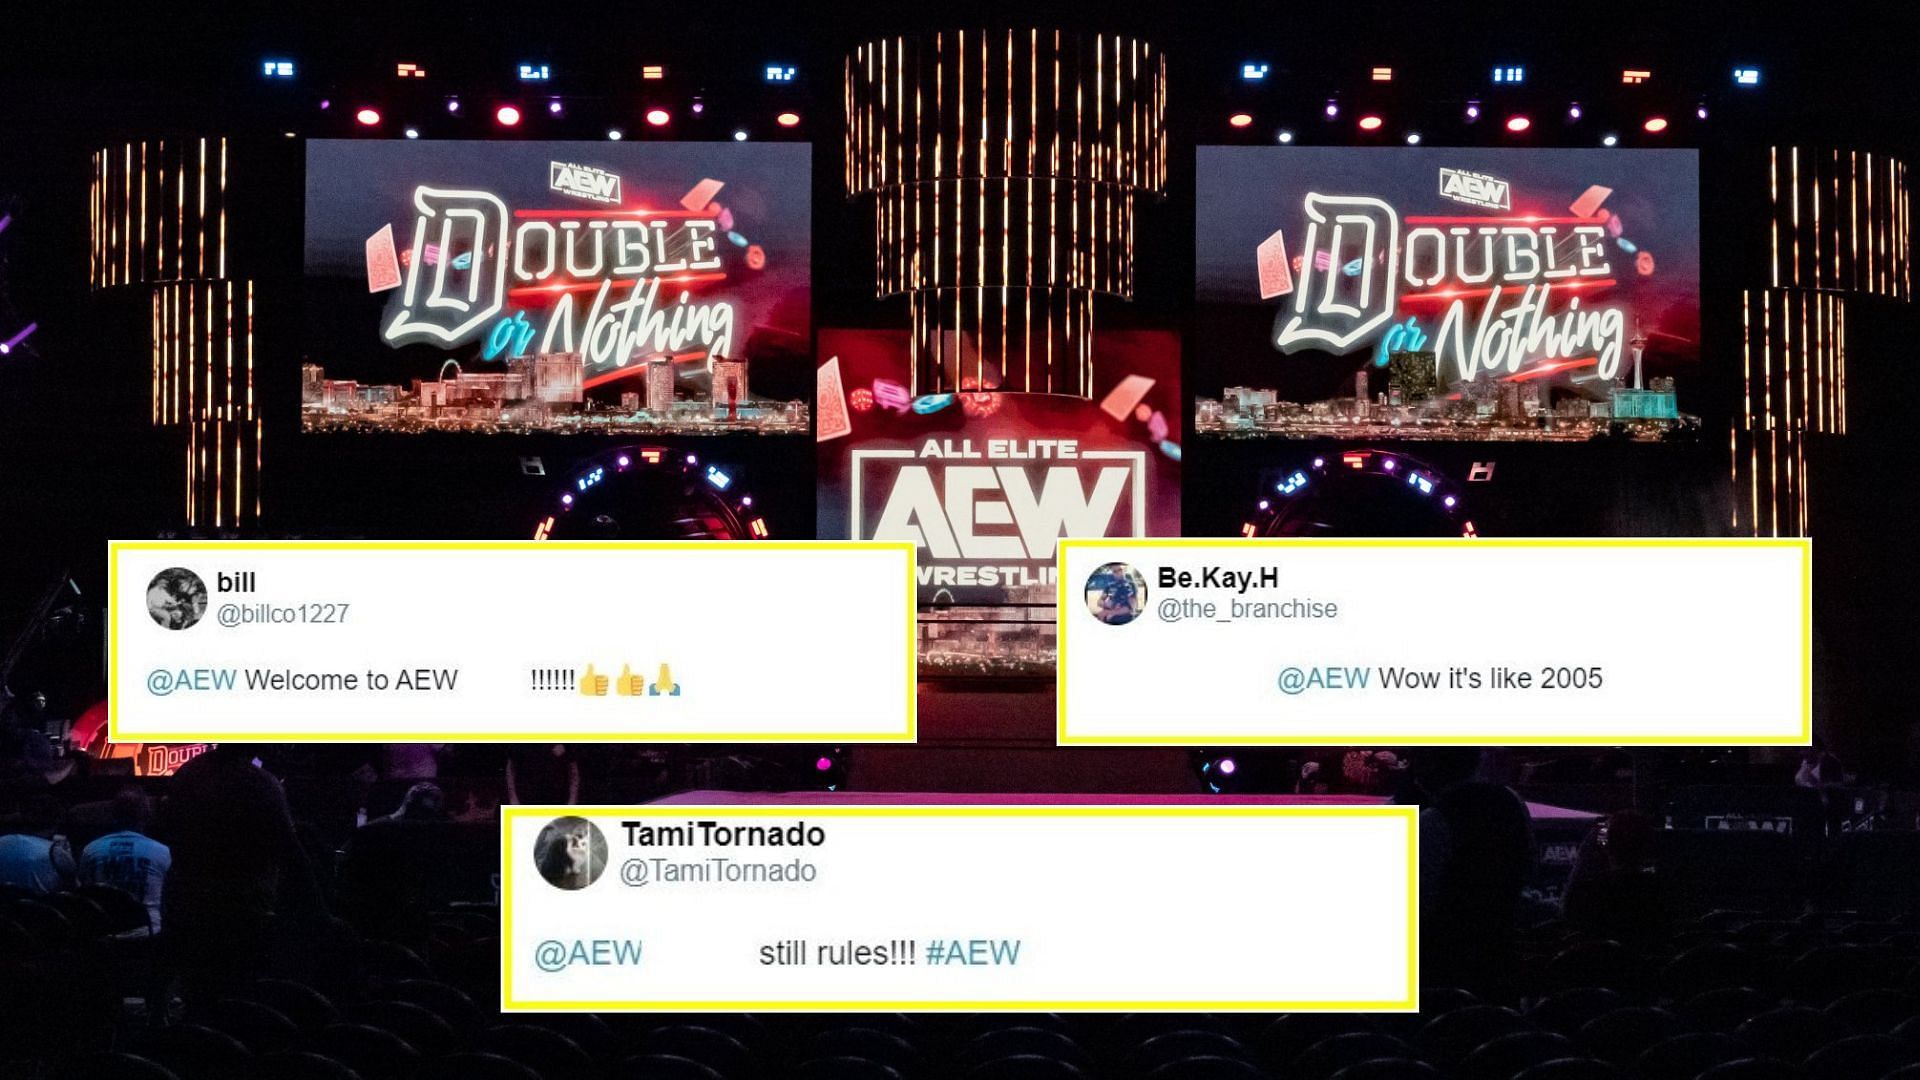 AEW Double or Nothing takes places at T-Mobile Arena